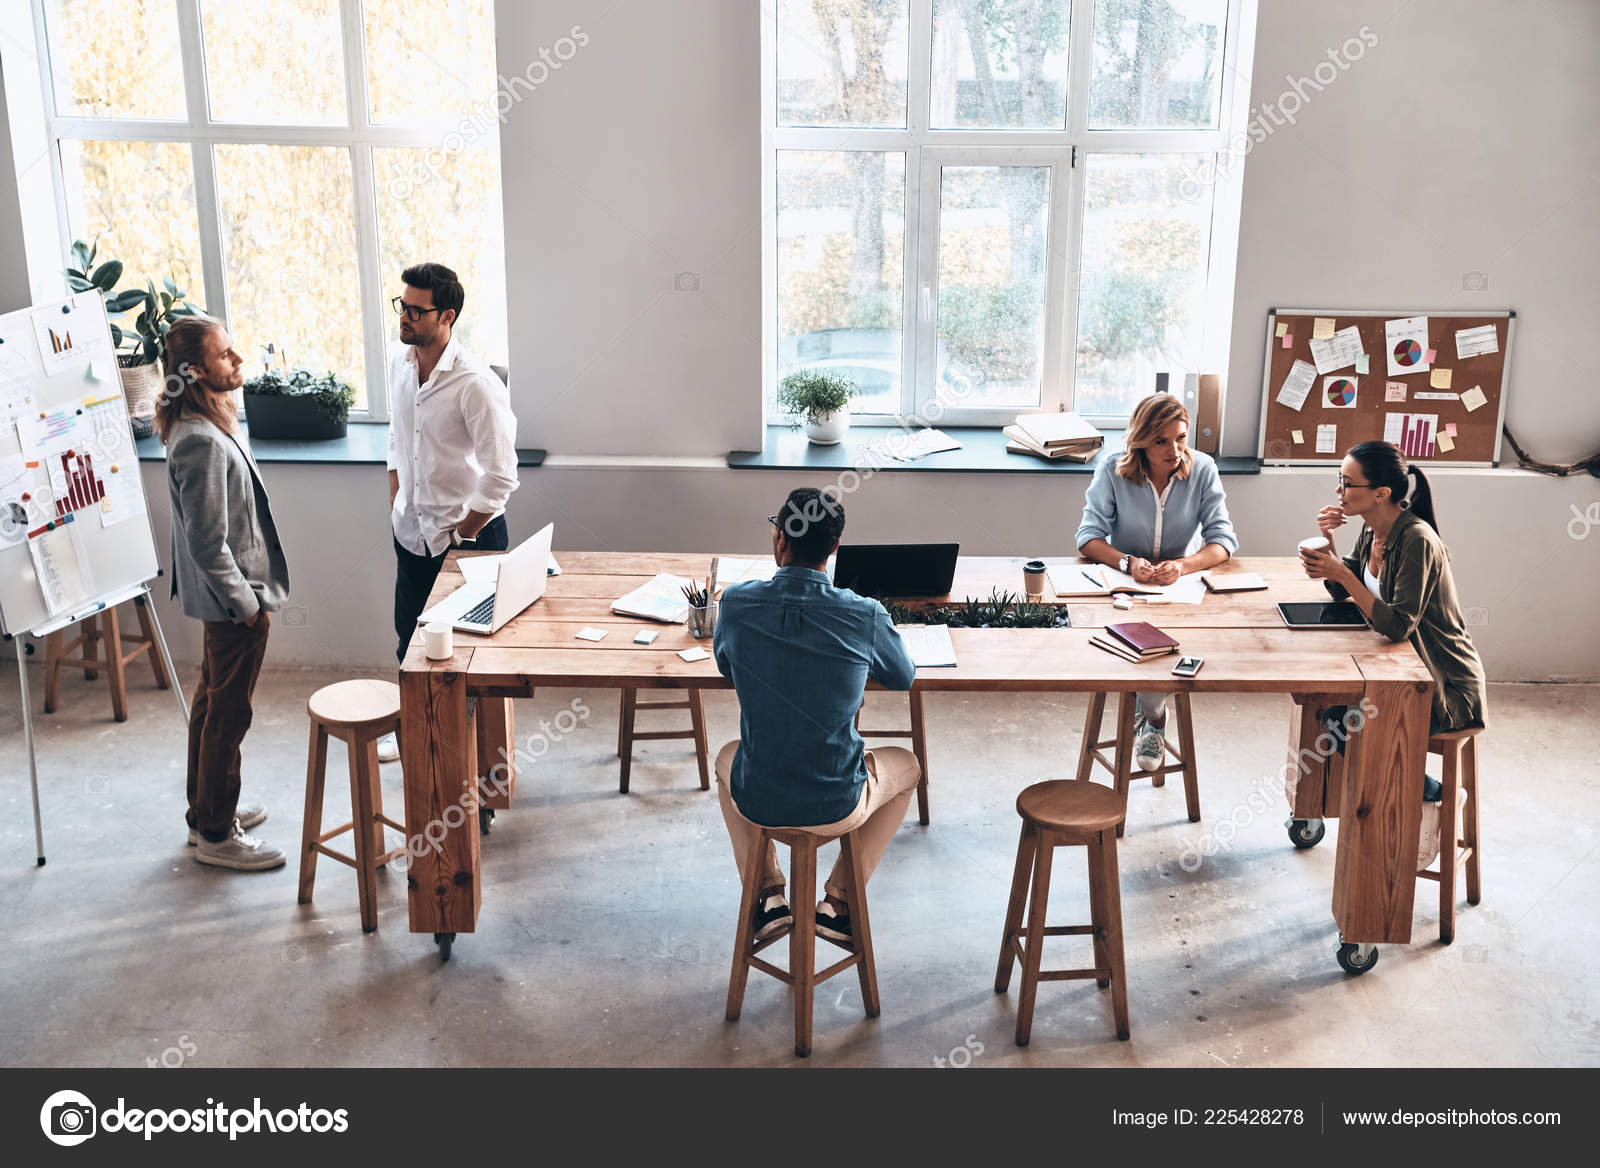 Creative Business People Brainstorming Modern Office Meeting Discussing  Concept Stock Photo by ©gstockstudio 225428278